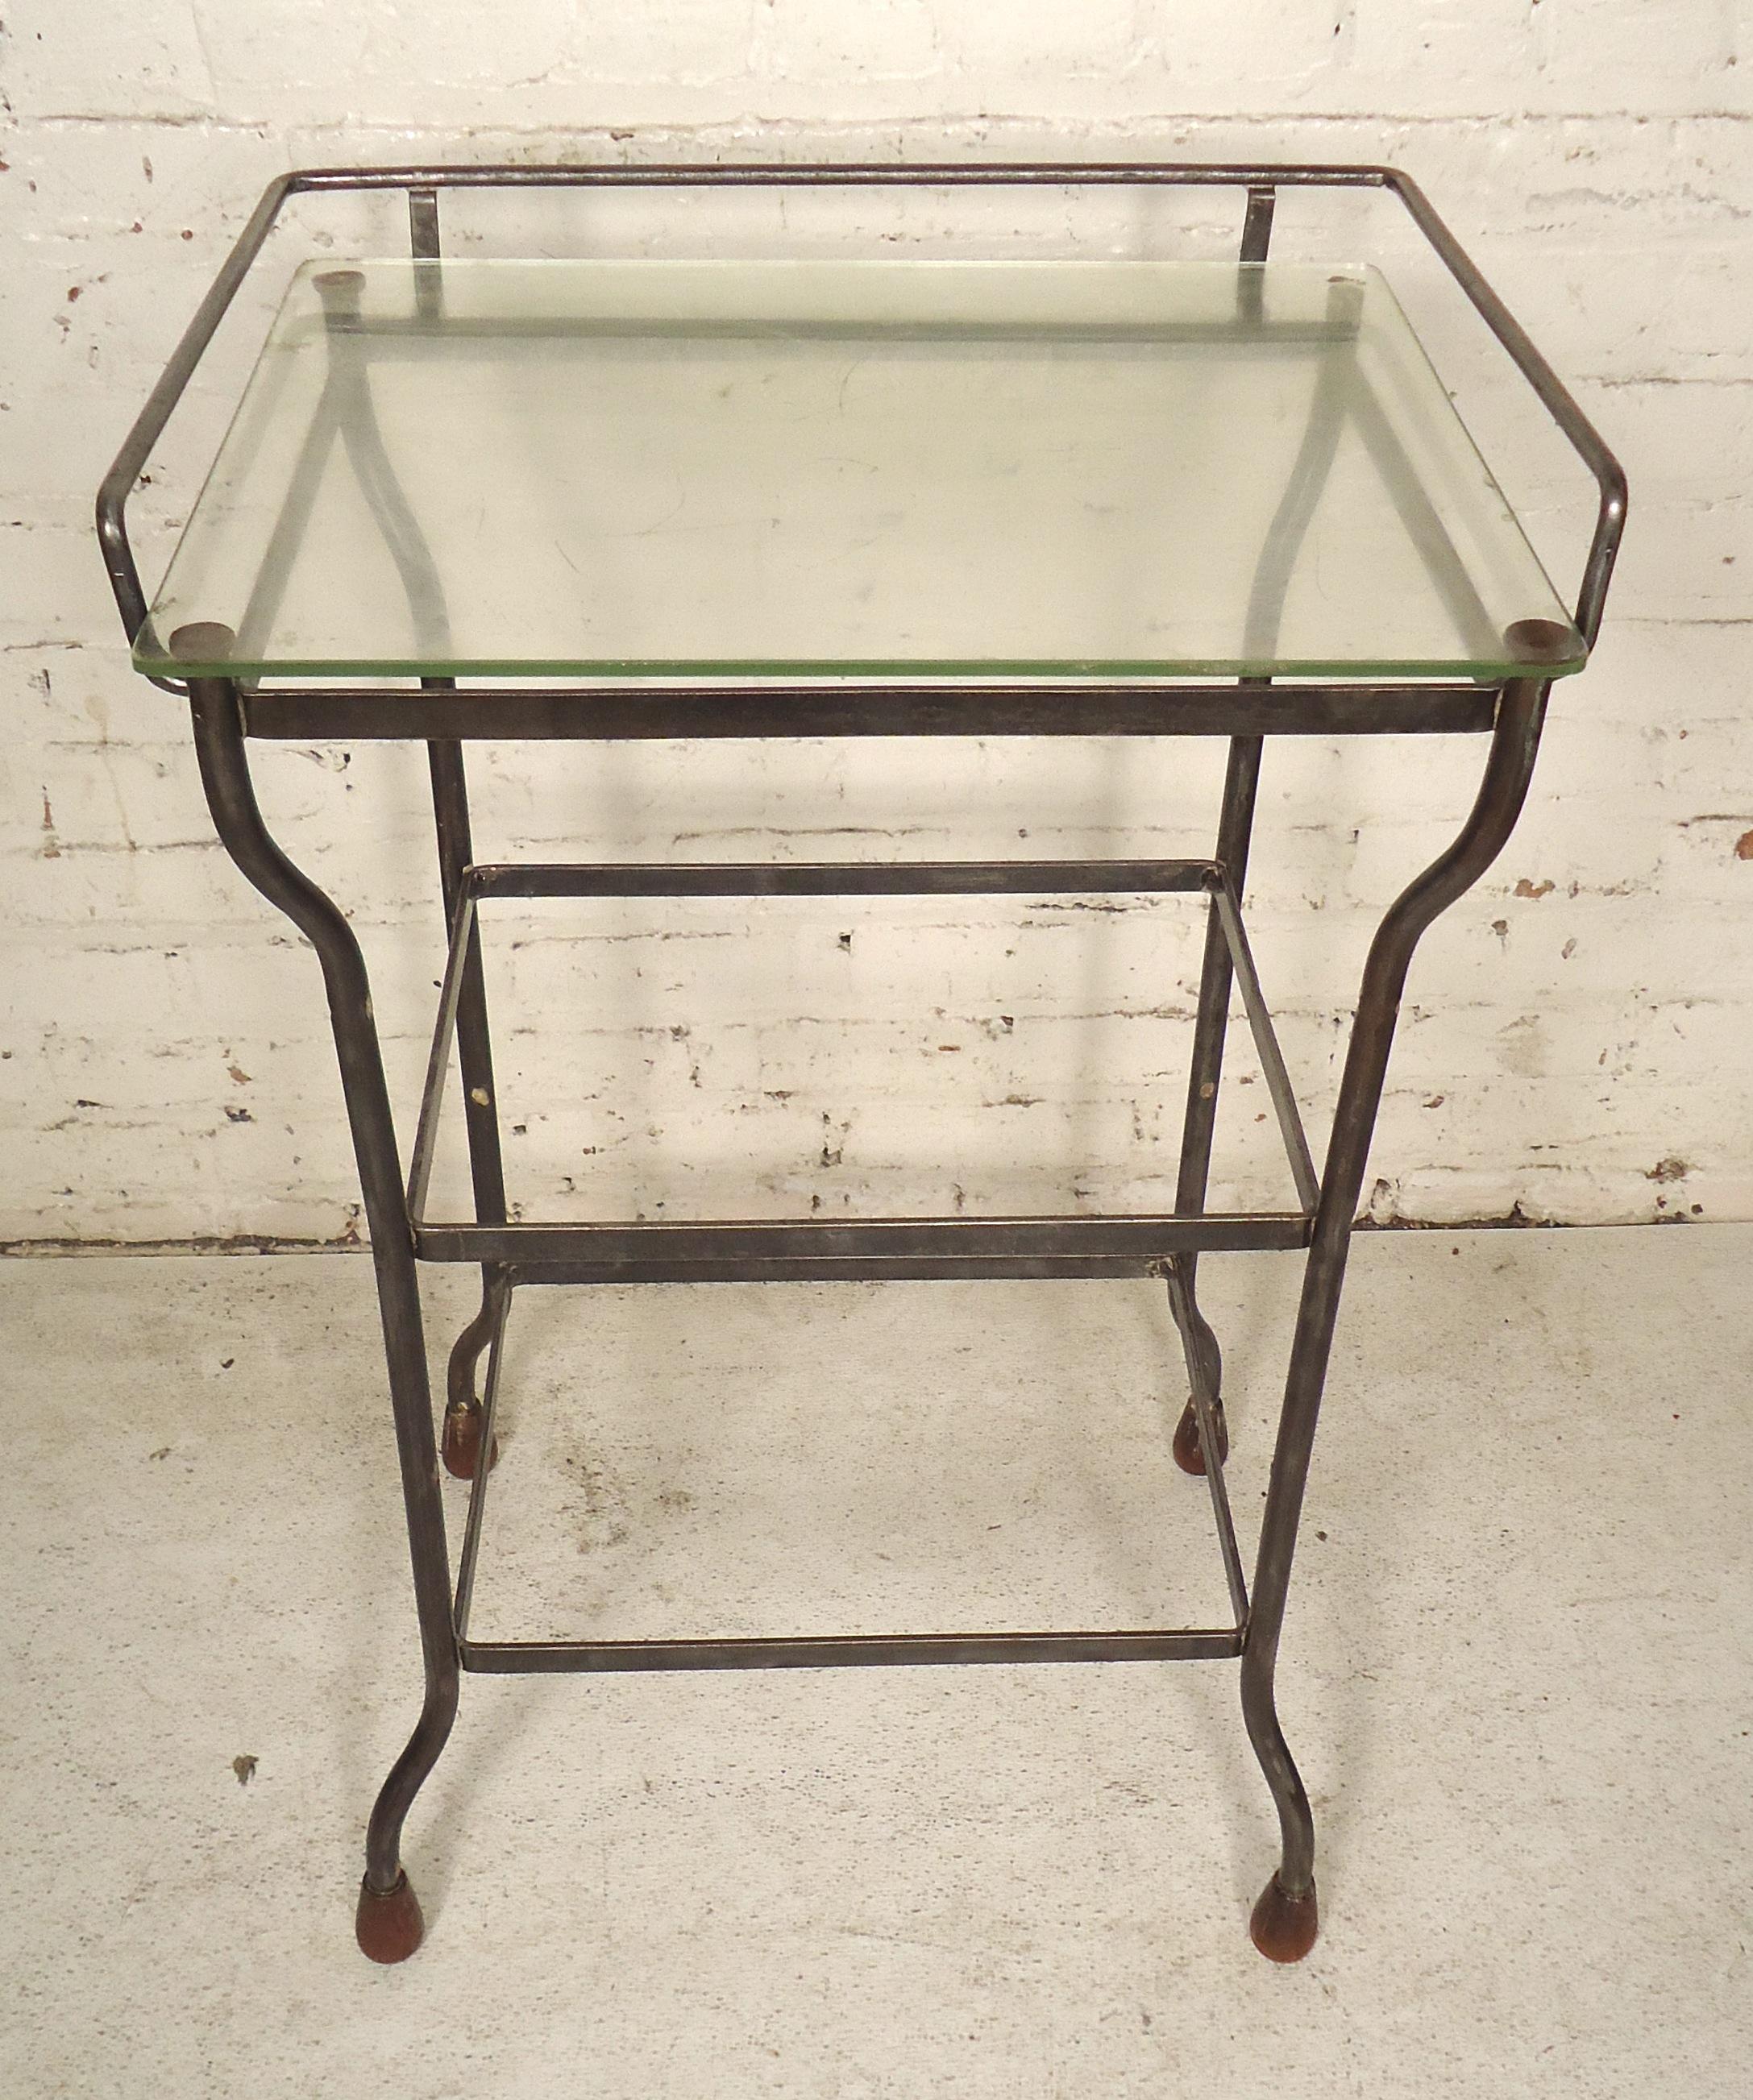 Metal table with glass top. Refinished in a bare metal style finish.

(Please confirm item location - NY or NJ - with dealer)
     